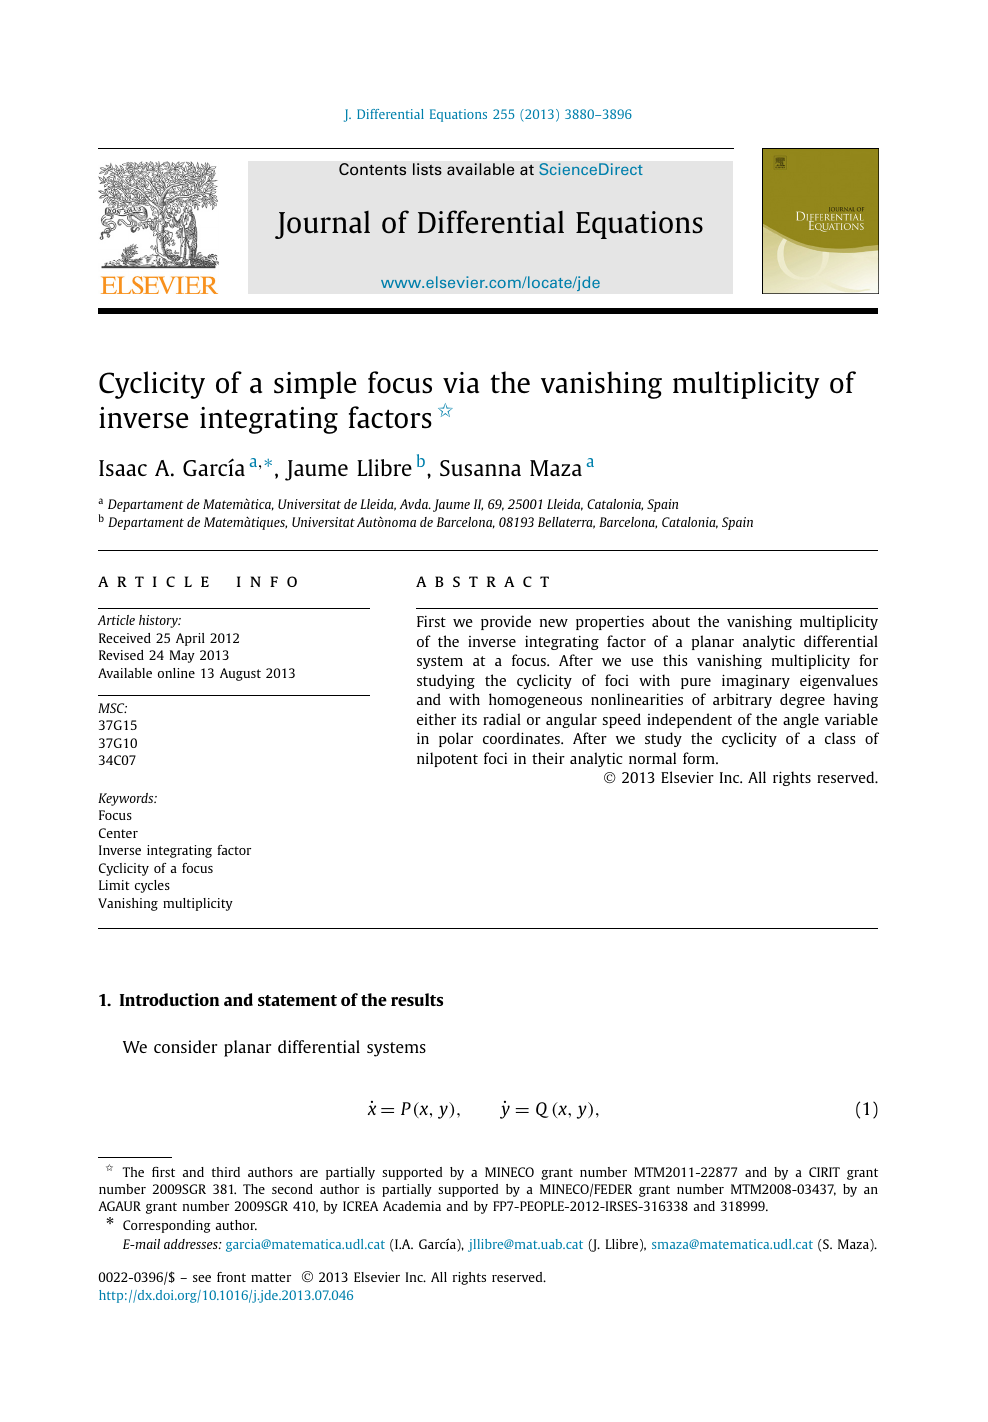 Cyclicity Of A Simple Focus Via The Vanishing Multiplicity Of Inverse Integrating Factors Topic Of Research Paper In Mathematics Download Scholarly Article Pdf And Read For Free On Cyberleninka Open Science